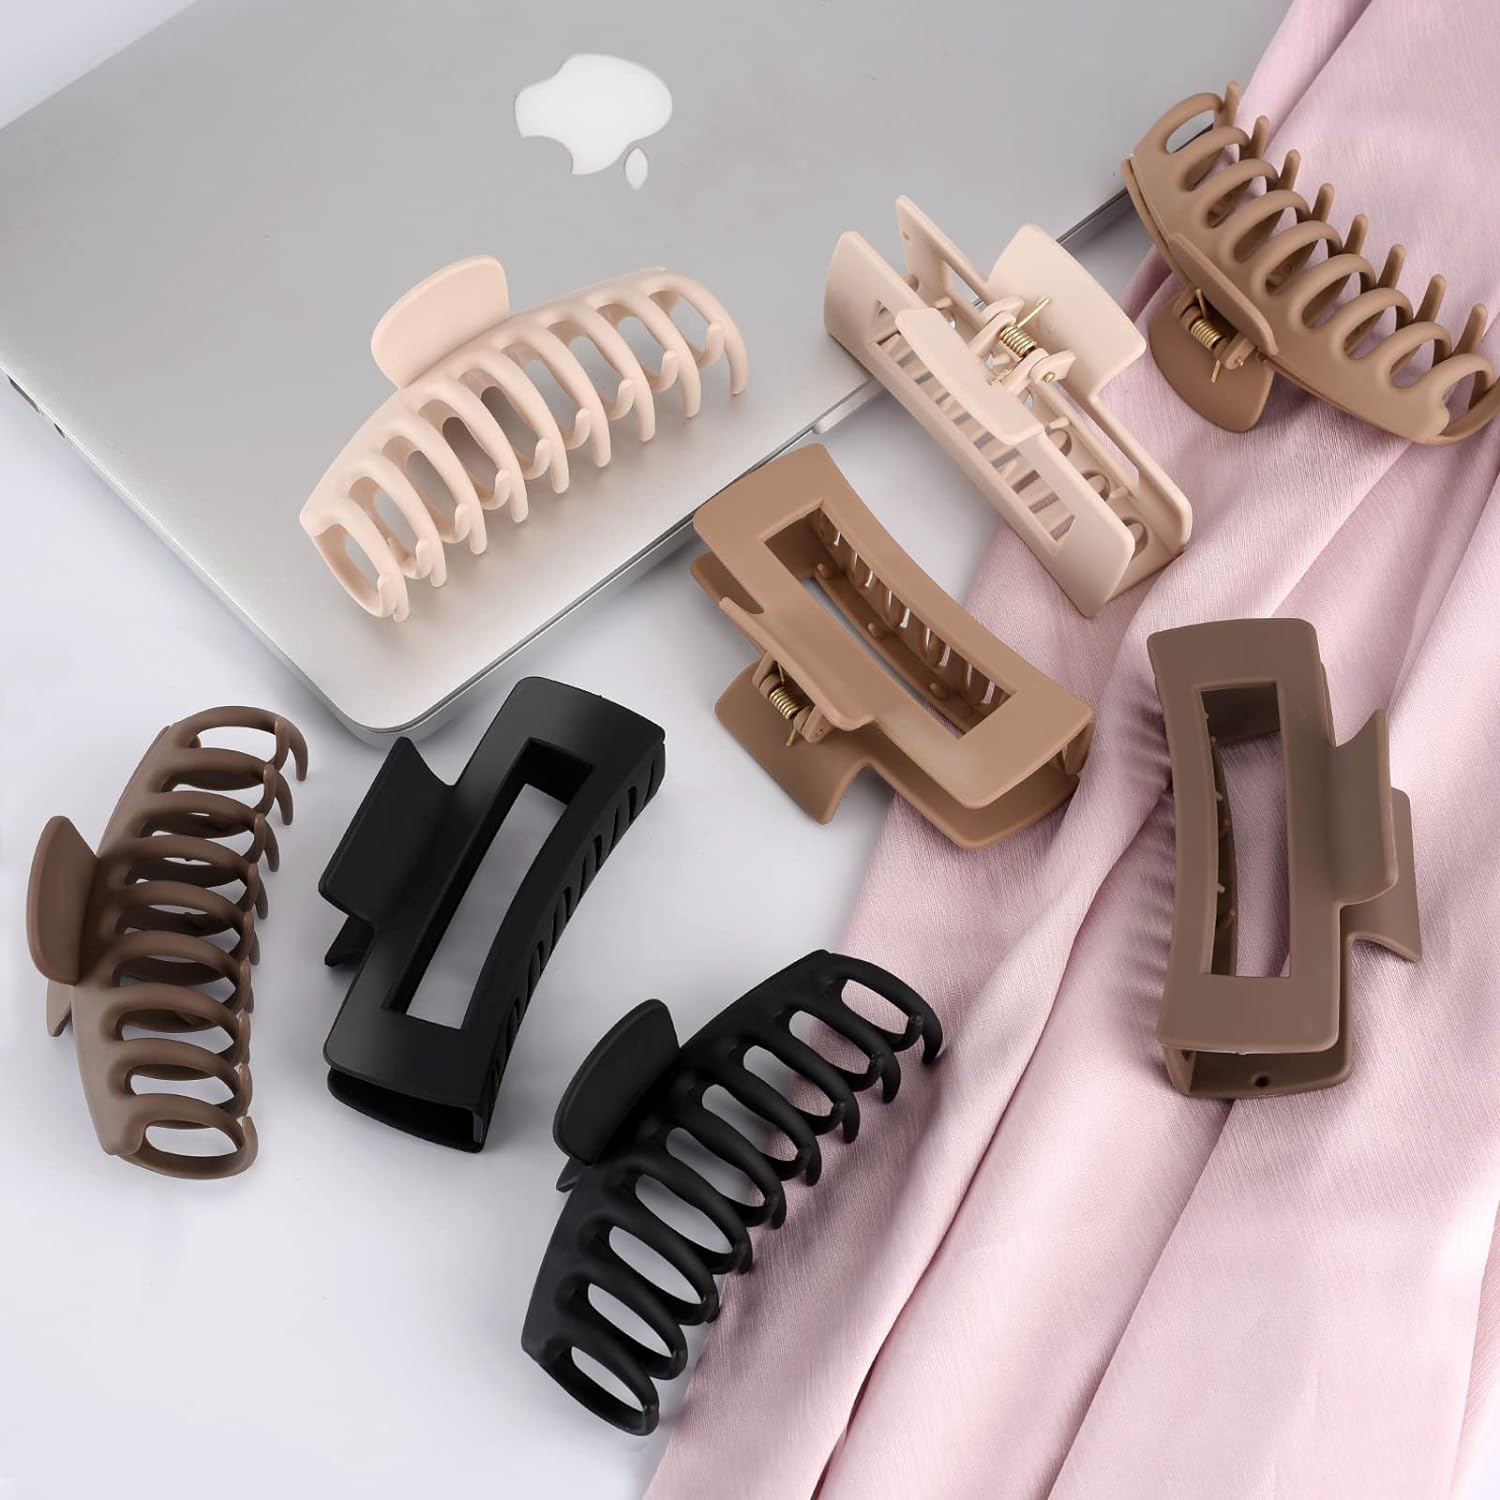 LuSeren Hair Clips for Women 4.3 Inch Large Hair Claw Clips for Women Thin Thick Curly Hair, Big Matte Banana Clips,Strong Hold jaw clips,Neutral Colors